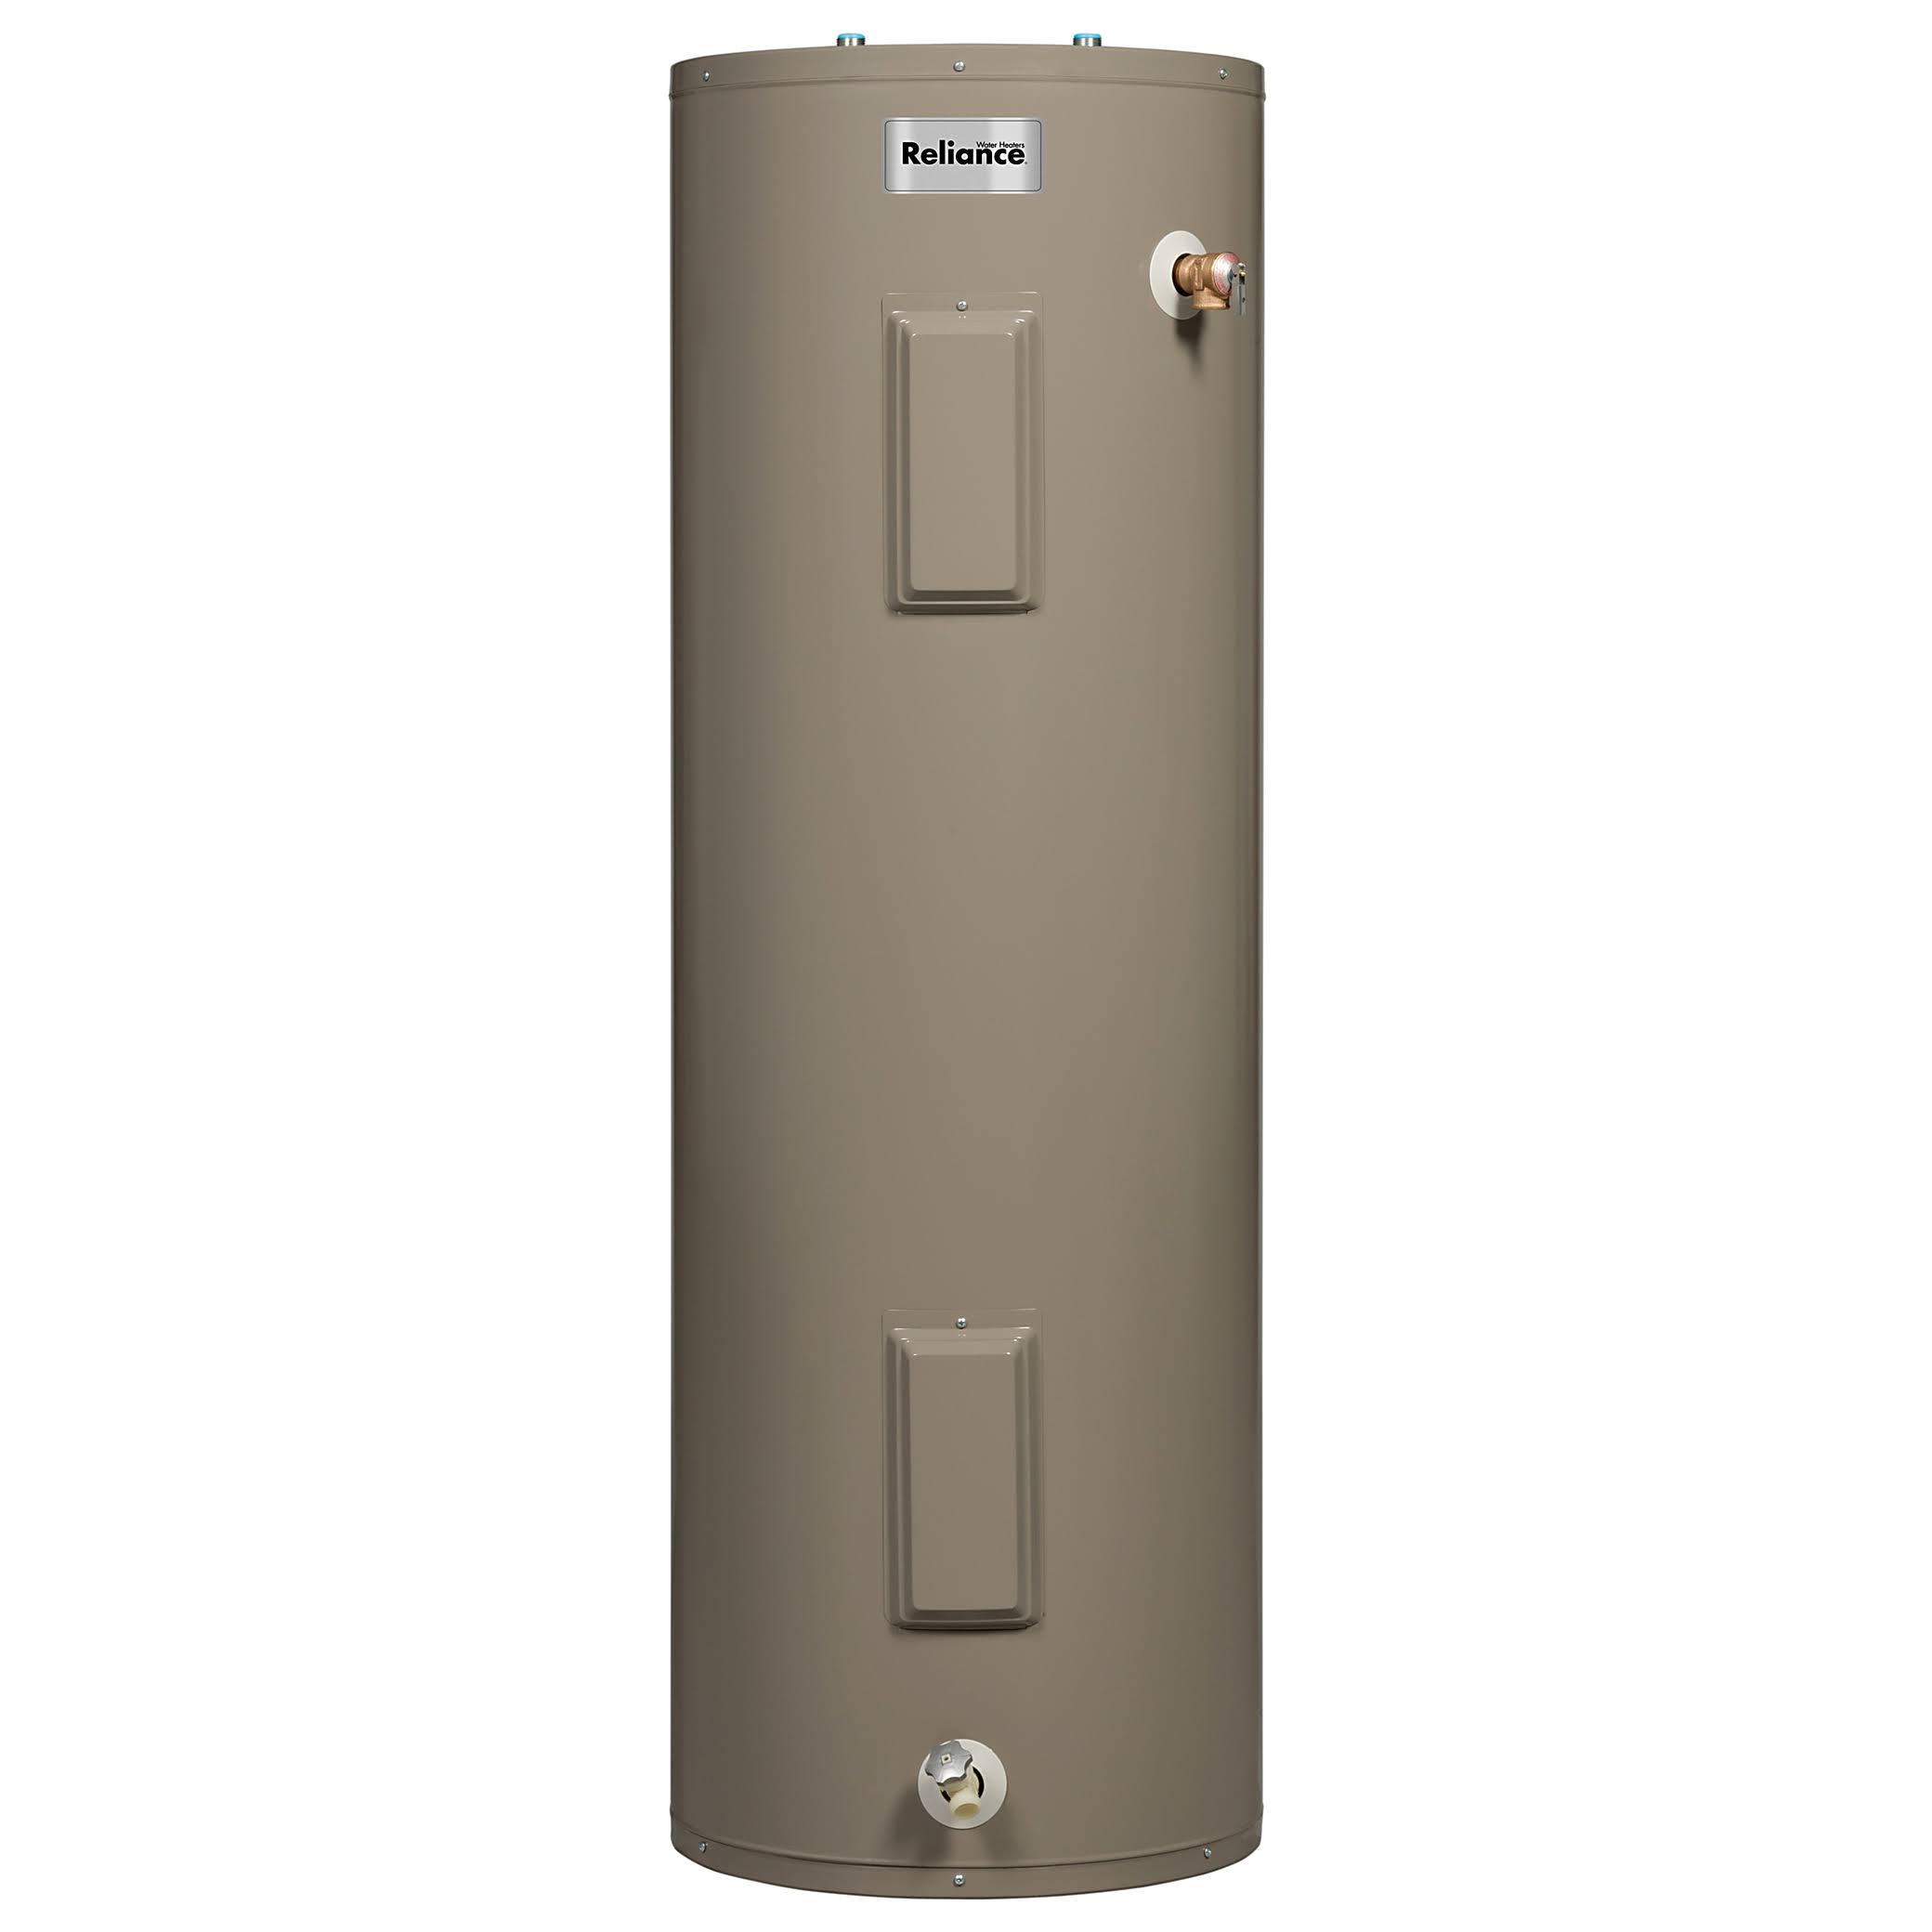 Reliance 6-50-EORT 100 Electric Water Heater - 50gal